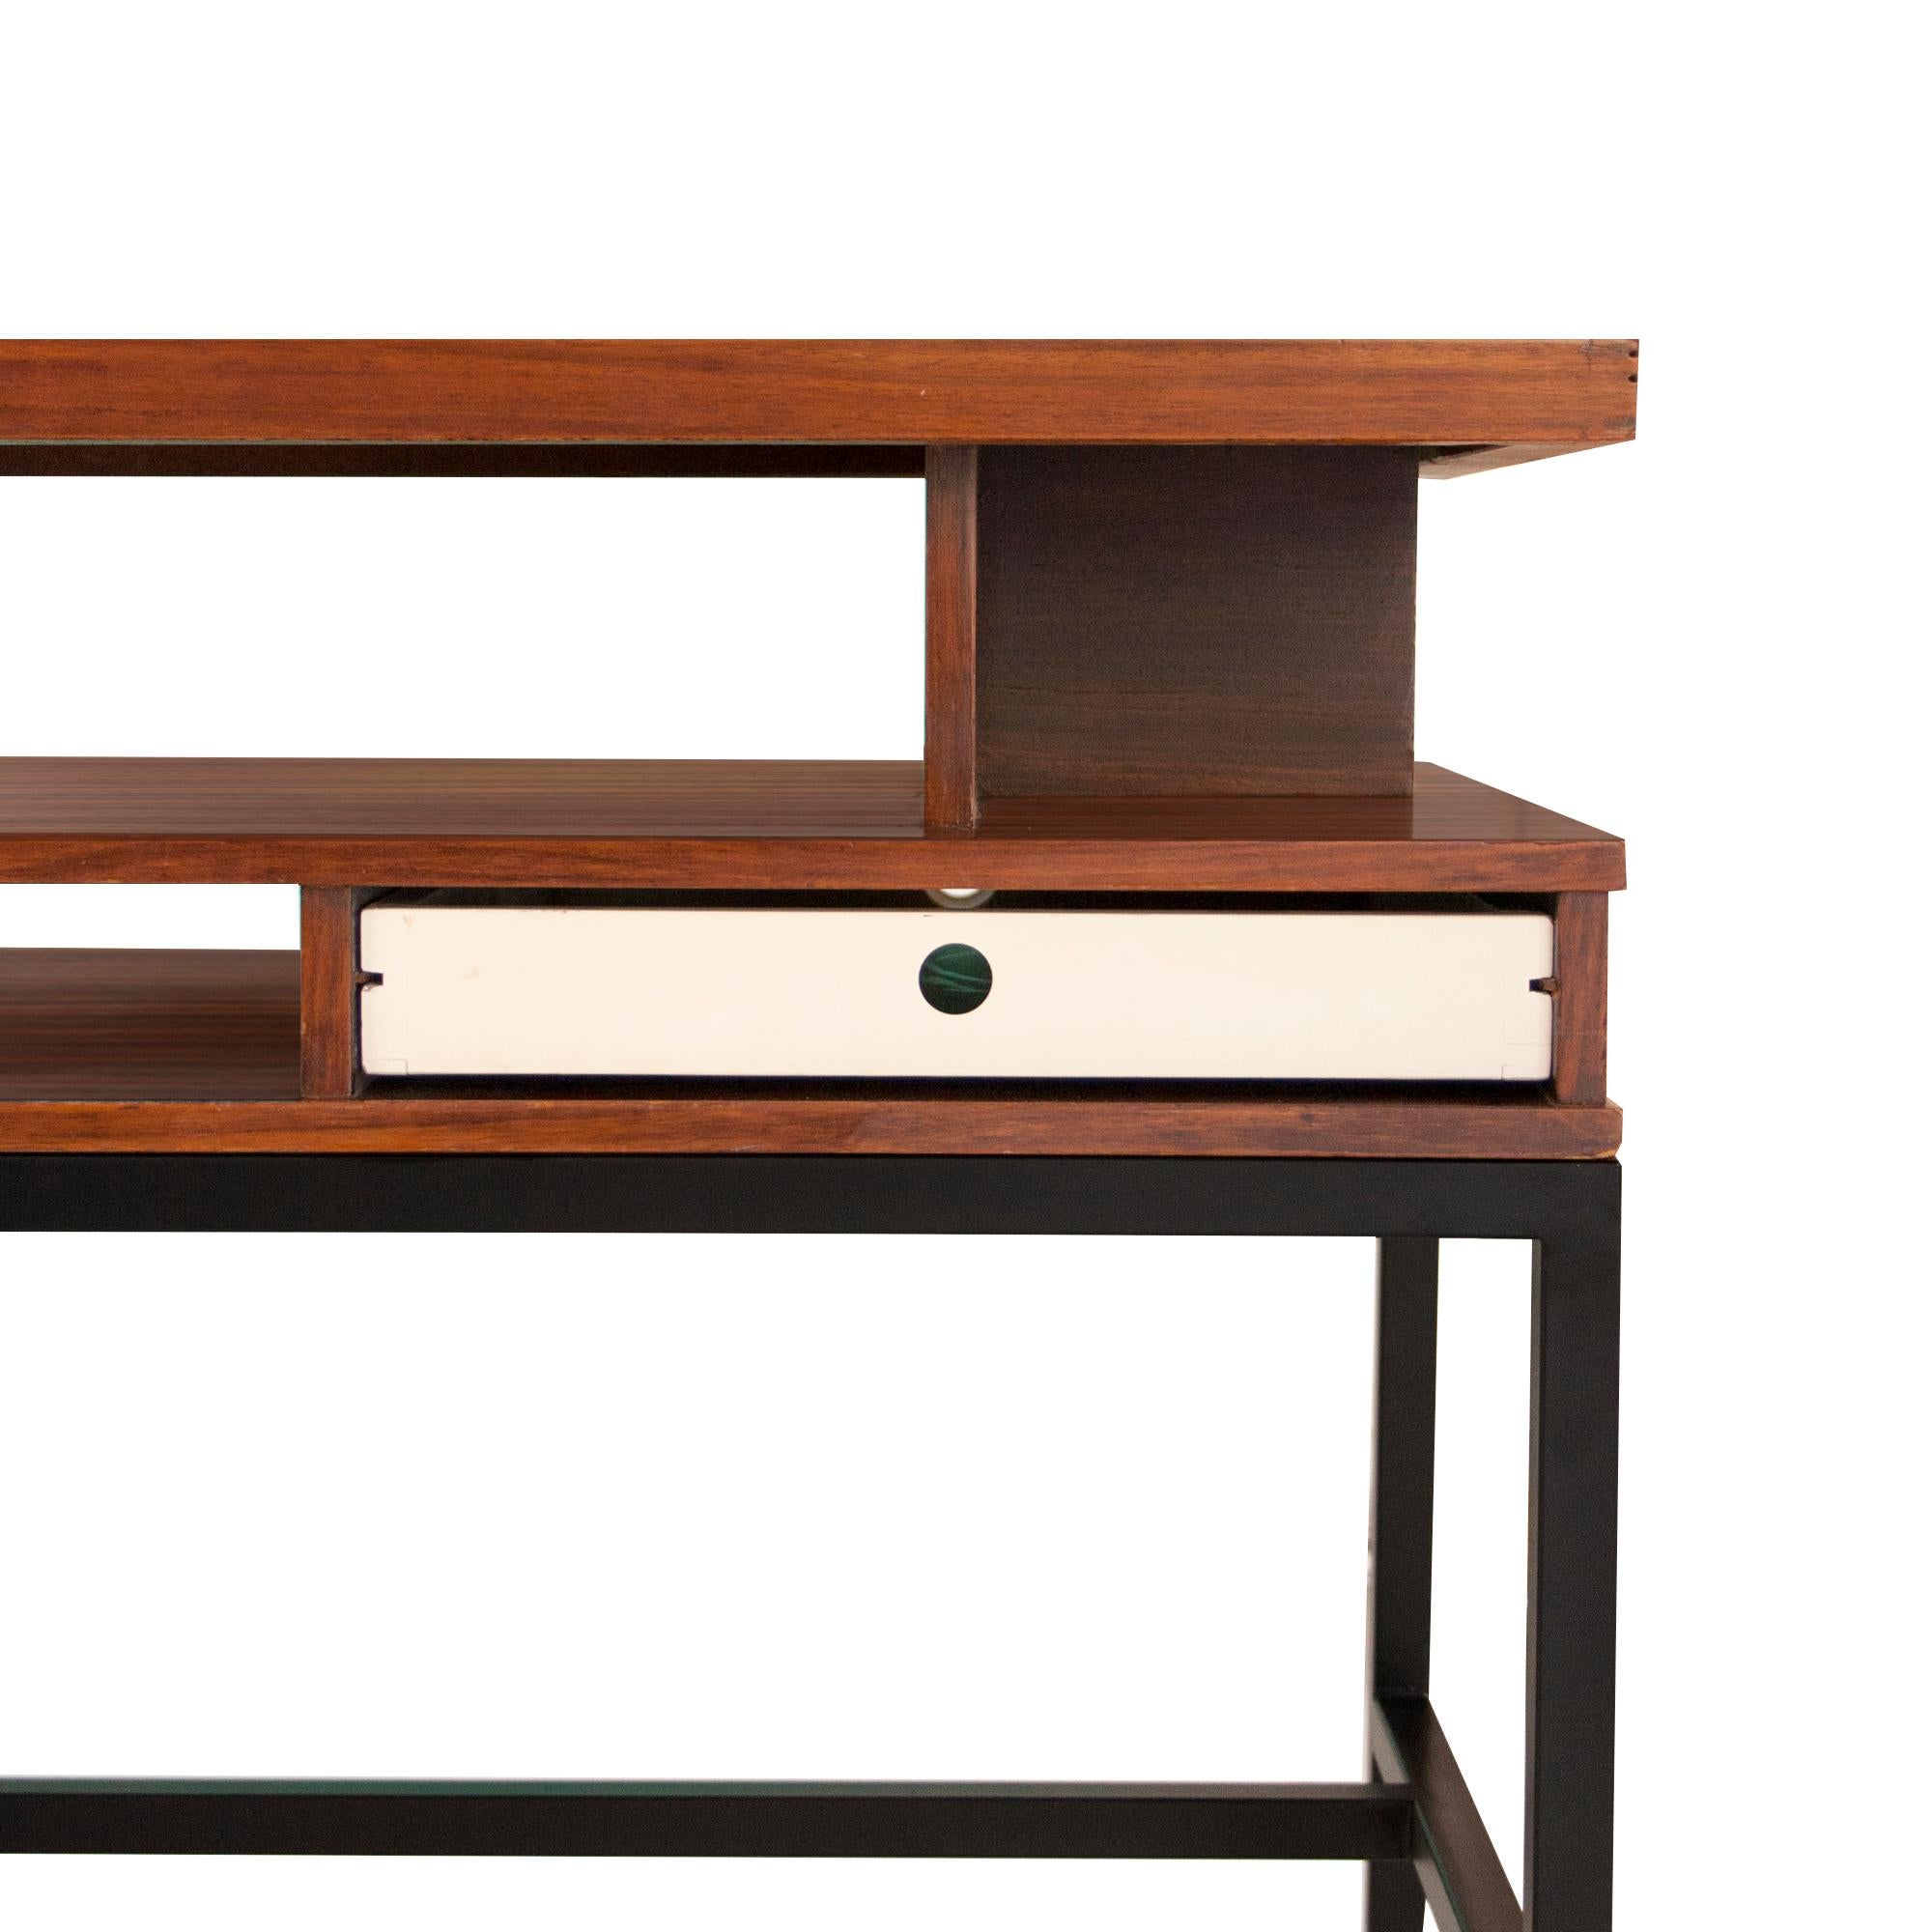 Italian Mid-Century Modern Teak Console Table with White Lacquered Drawers, Italy, 1960 For Sale